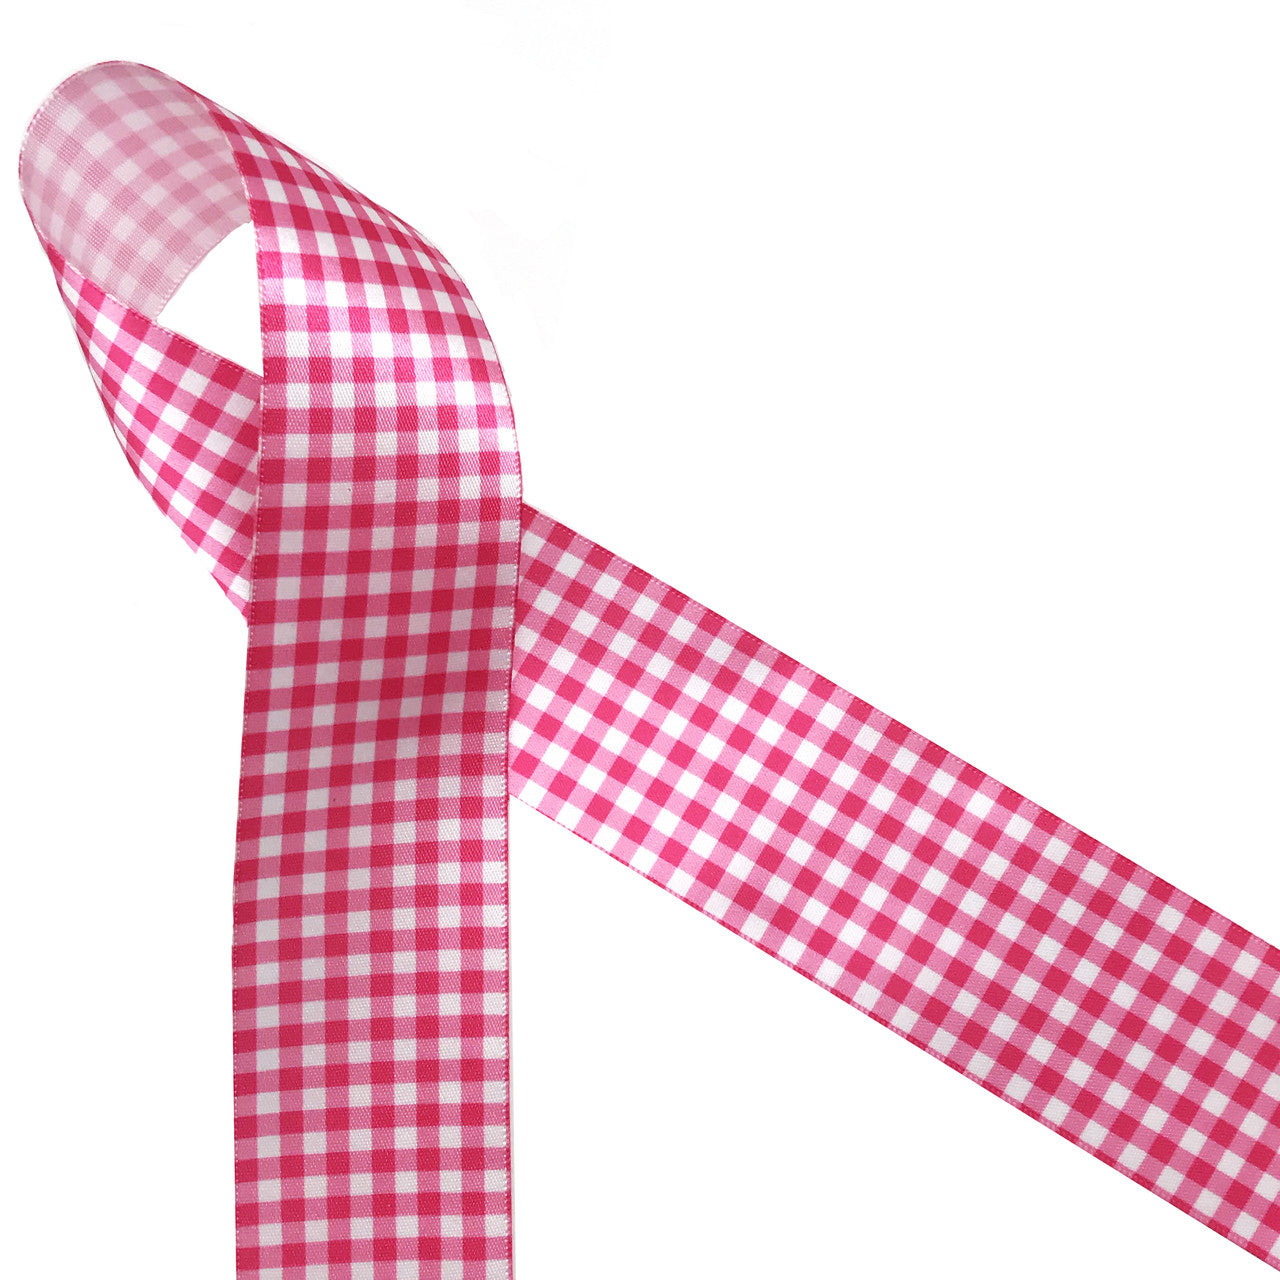 Hot pink gingham check on 1.5" white single face satin make for a beautiful staple in your ribbon collection! Be sure to have some on hand for Spring, Summer and any fun hot pink event!